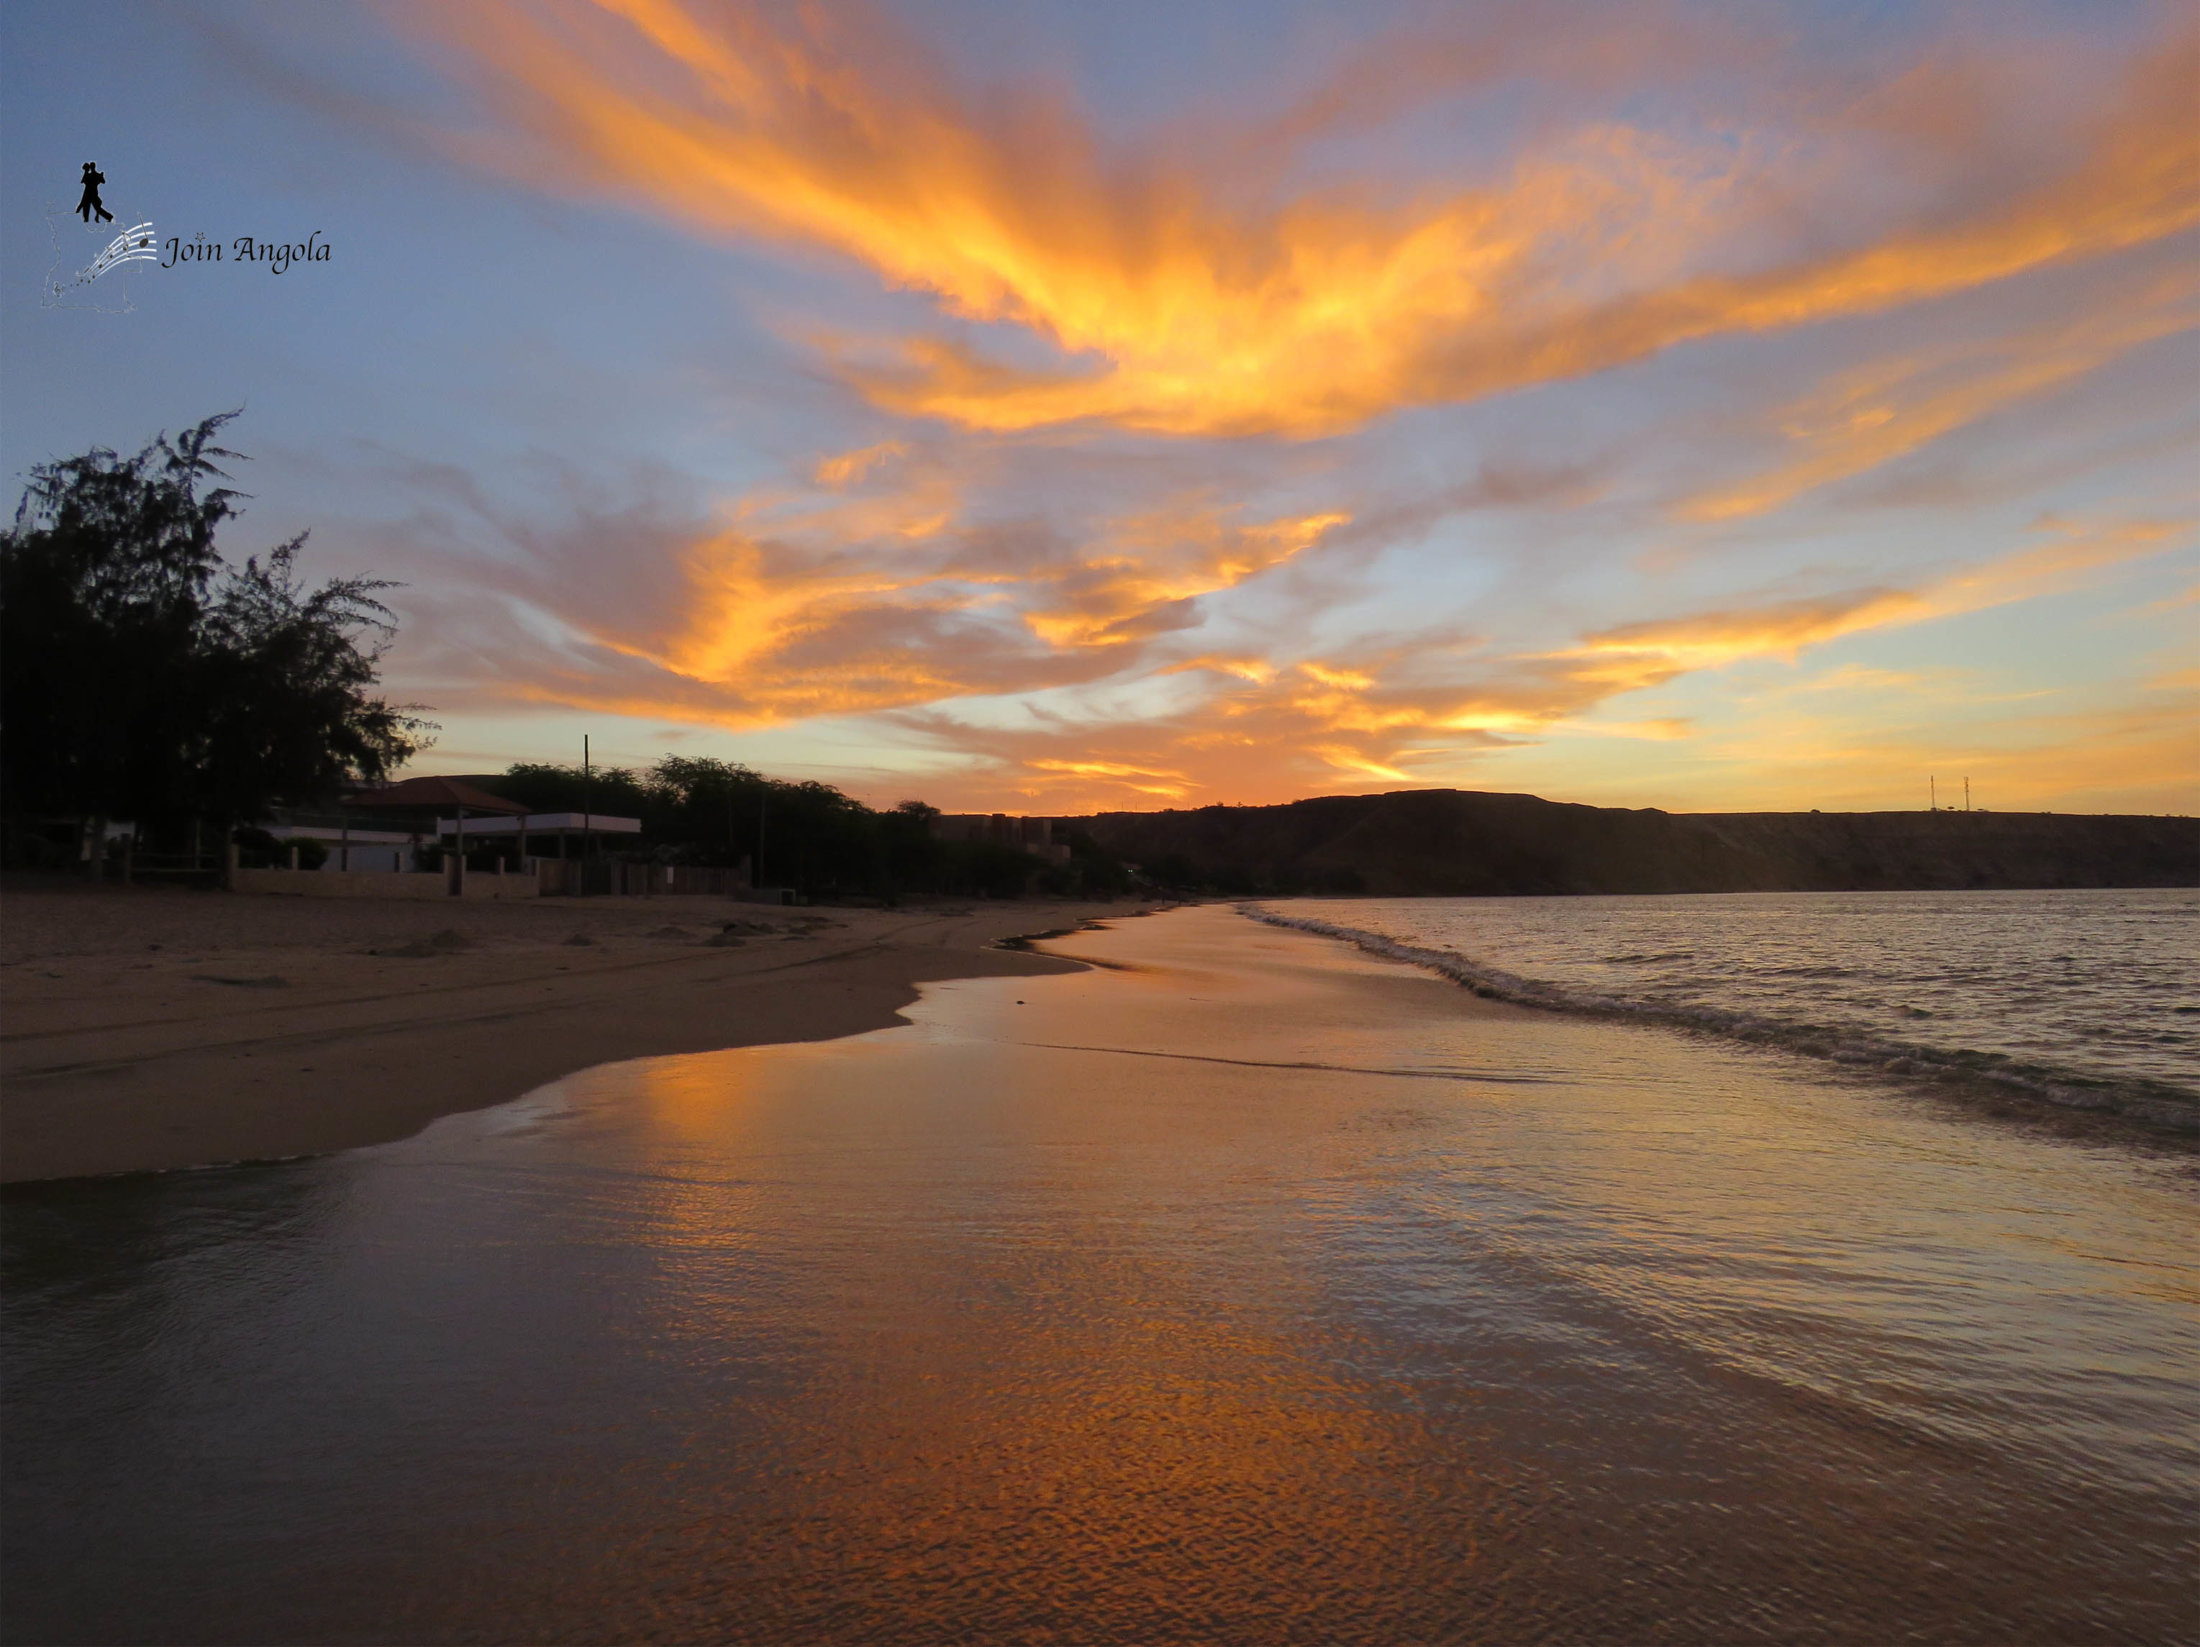 In Baia Azul, you'll be able to see some really spectacular sunsets. Have a drink to enjoy on the sand, or buy one at the bars and restaurants there.